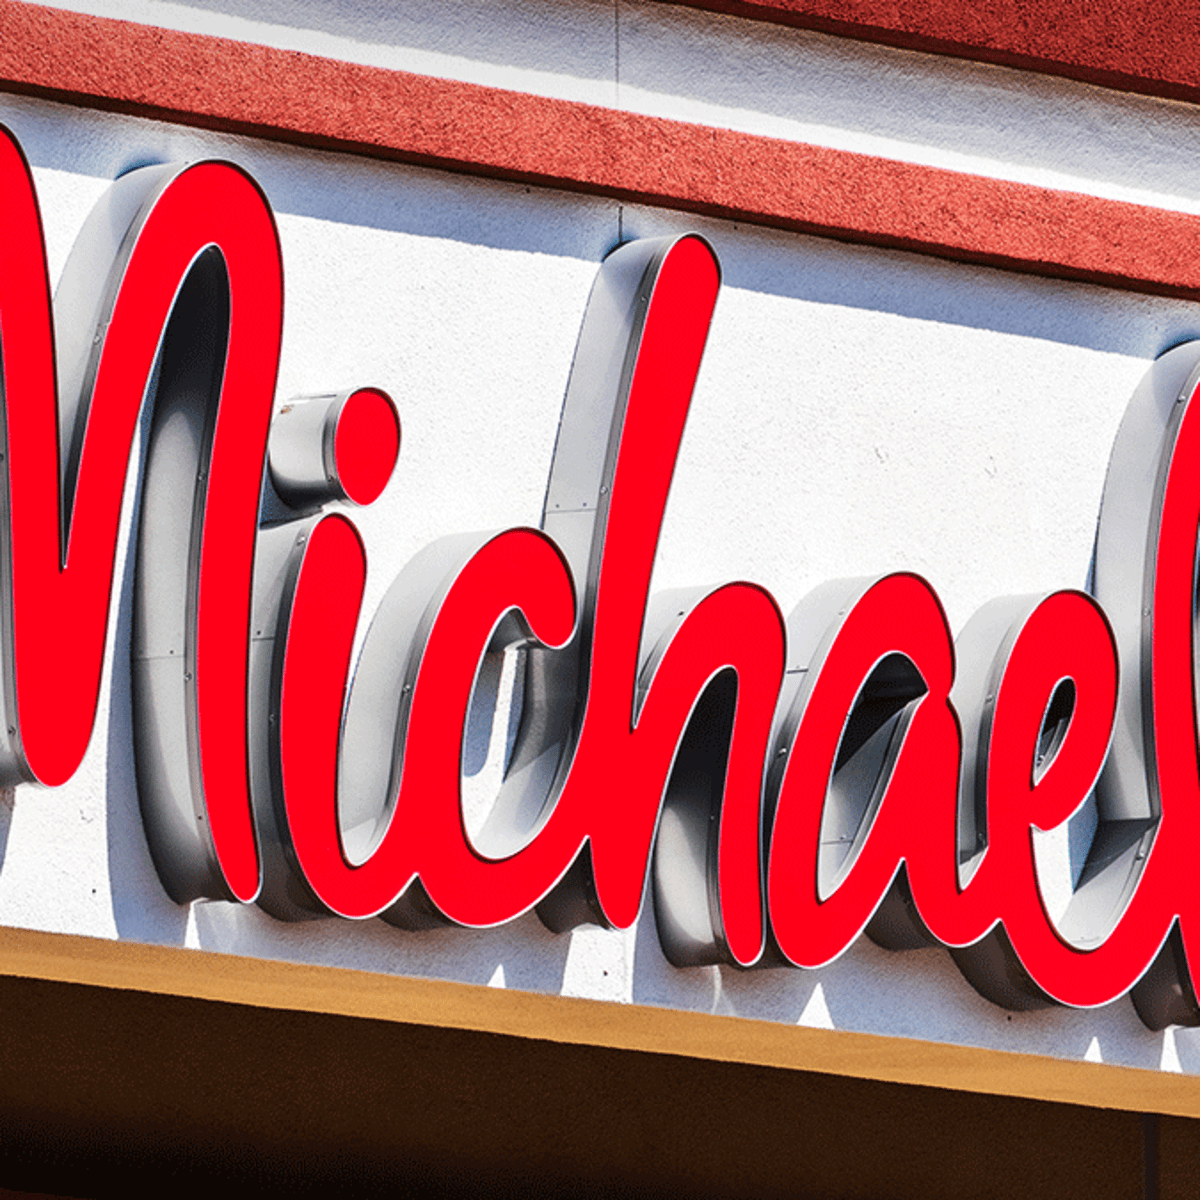 How CEO Ashley Buchanan Is Crafting A Brand New Michaels